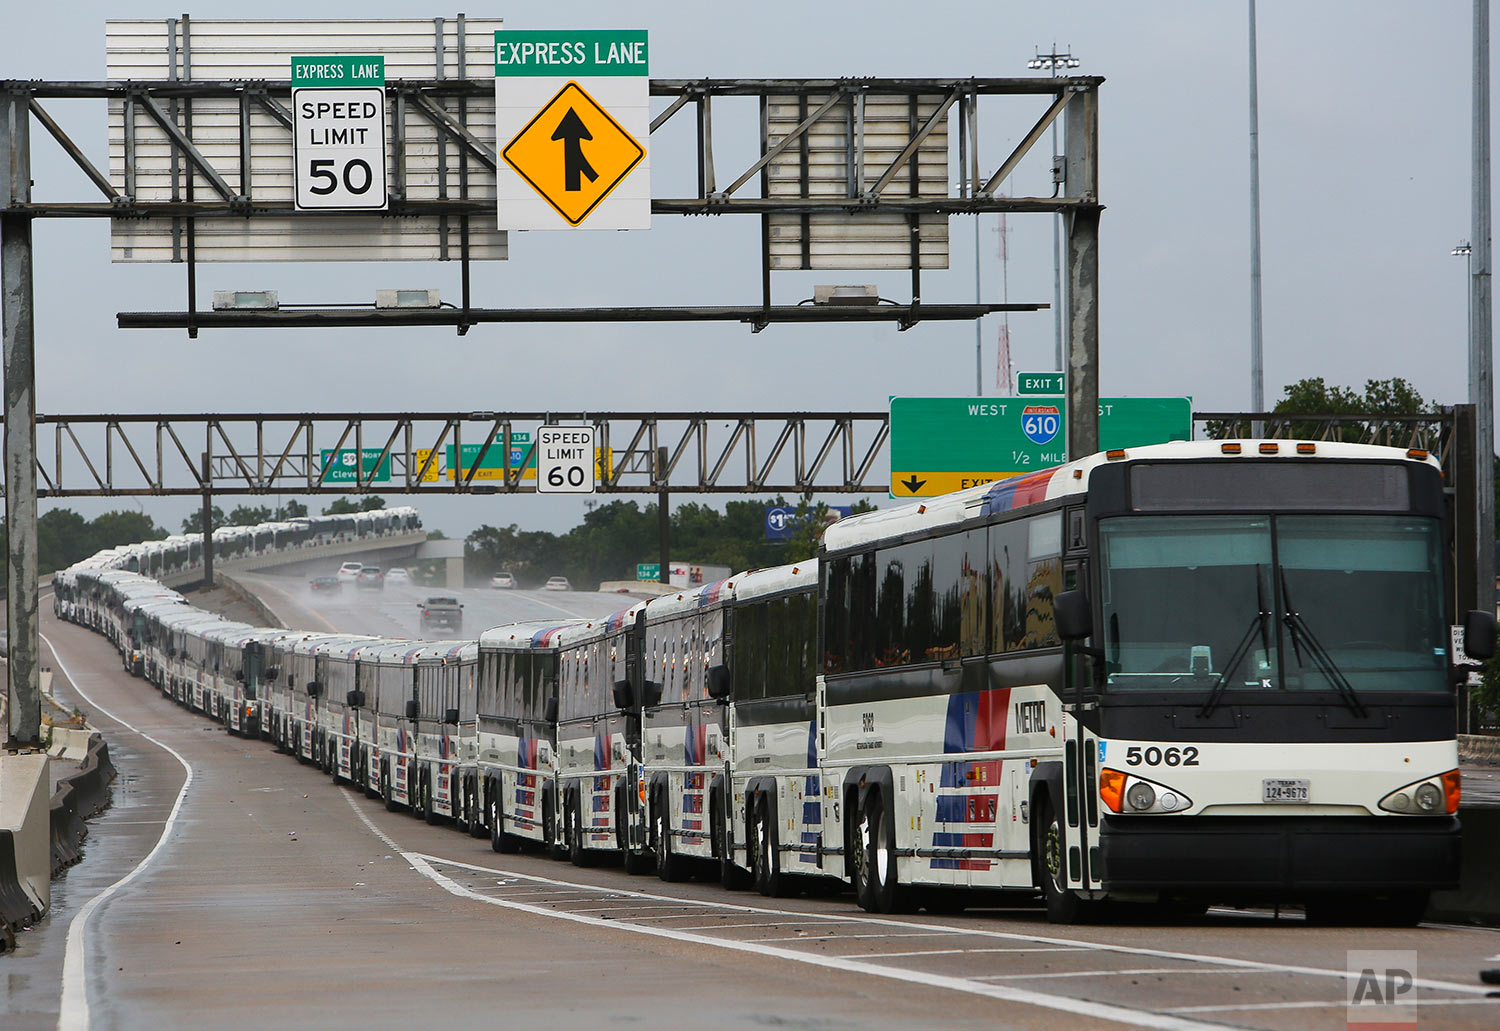 As a preventative measure, empty Metro buses are lined up in the center lanes of Interstate 59 near Cavalcade in case their bus shelters flood, Saturday, Aug. 26, 2017, in Houston. (Mark Mulligan/Houston Chronicle via AP)